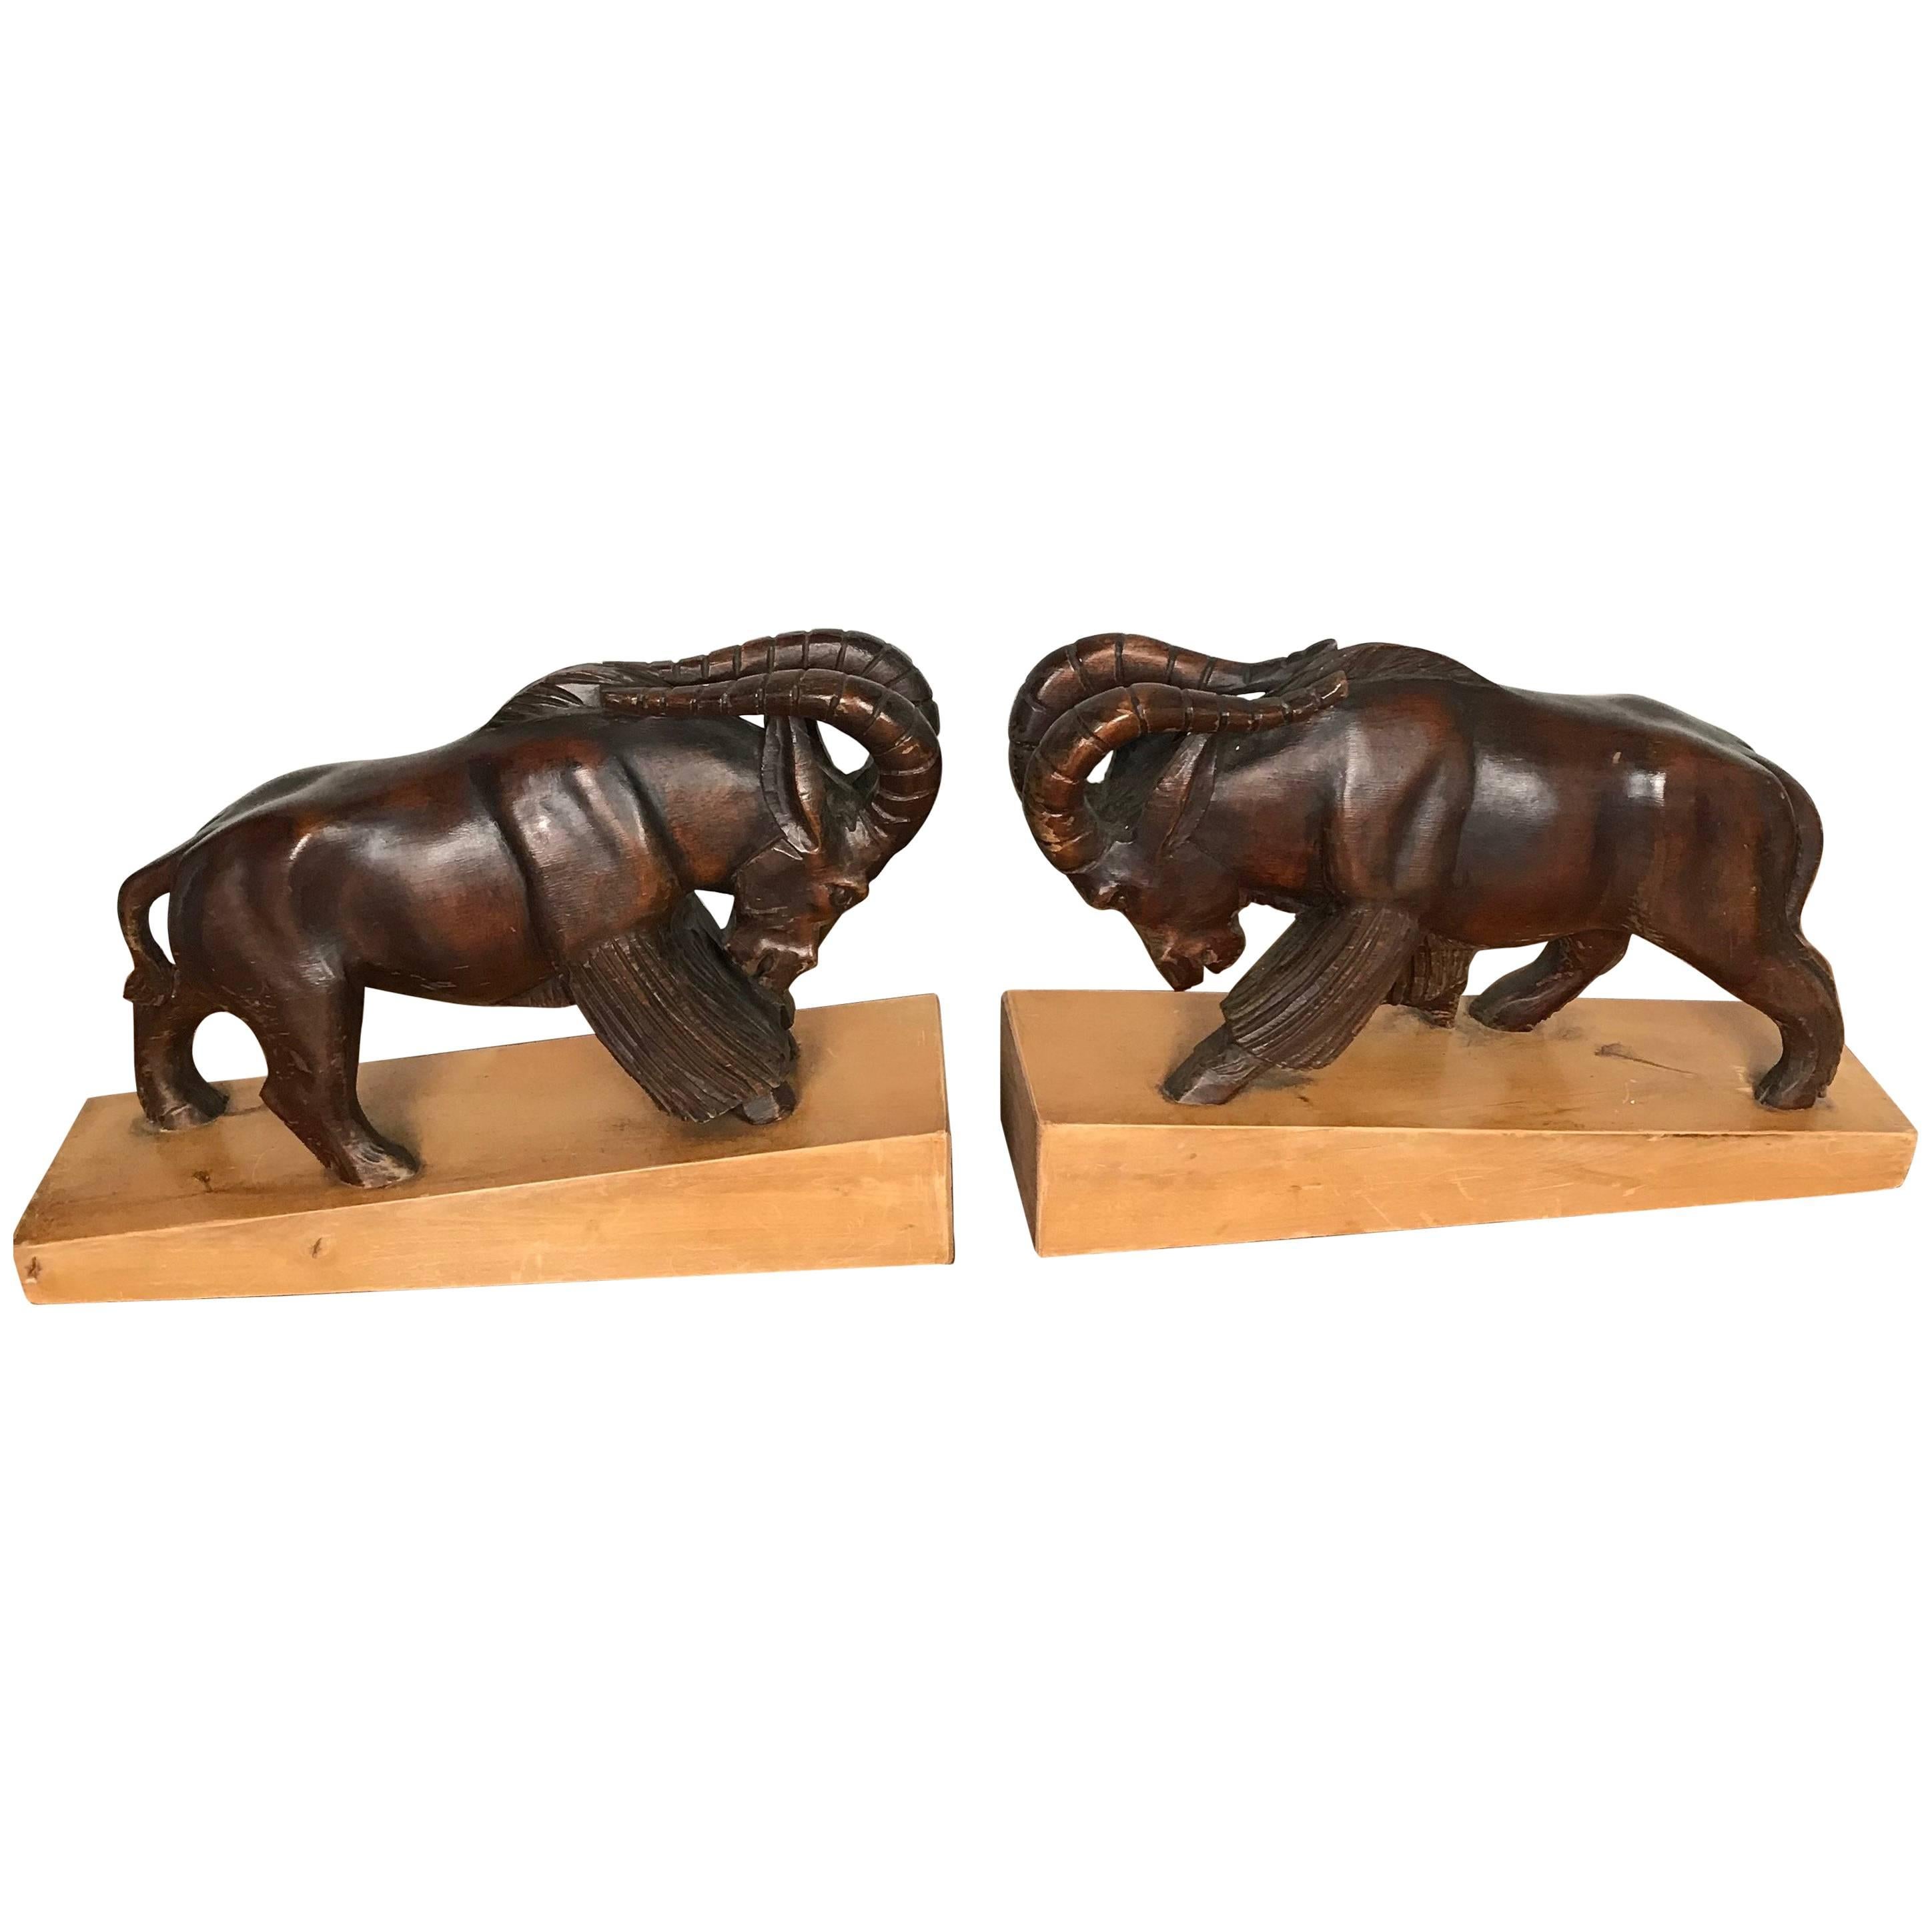 Large & Impressive Hand-Carved Wooden Pair of Fighting Ram Sculpture Bookends